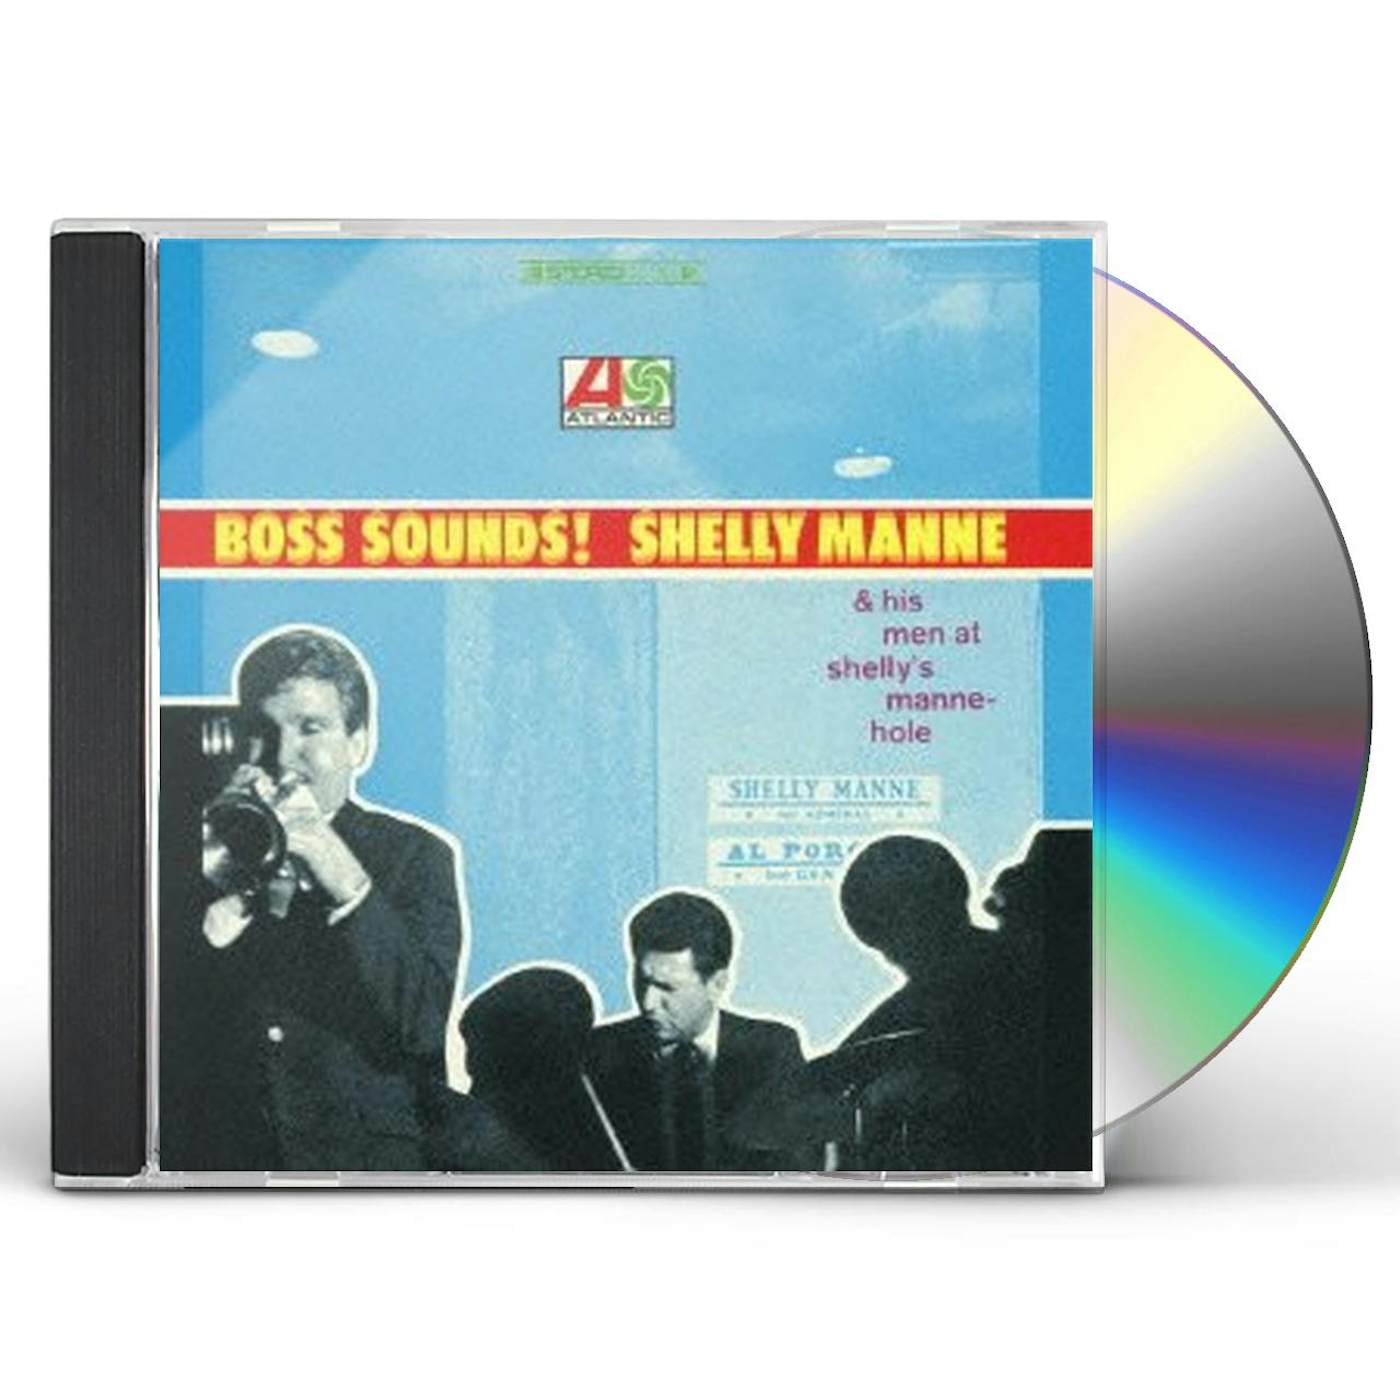 BOSS SOUNDS: SHELLY MANNE & HIS MEN AT SHELLY'S CD